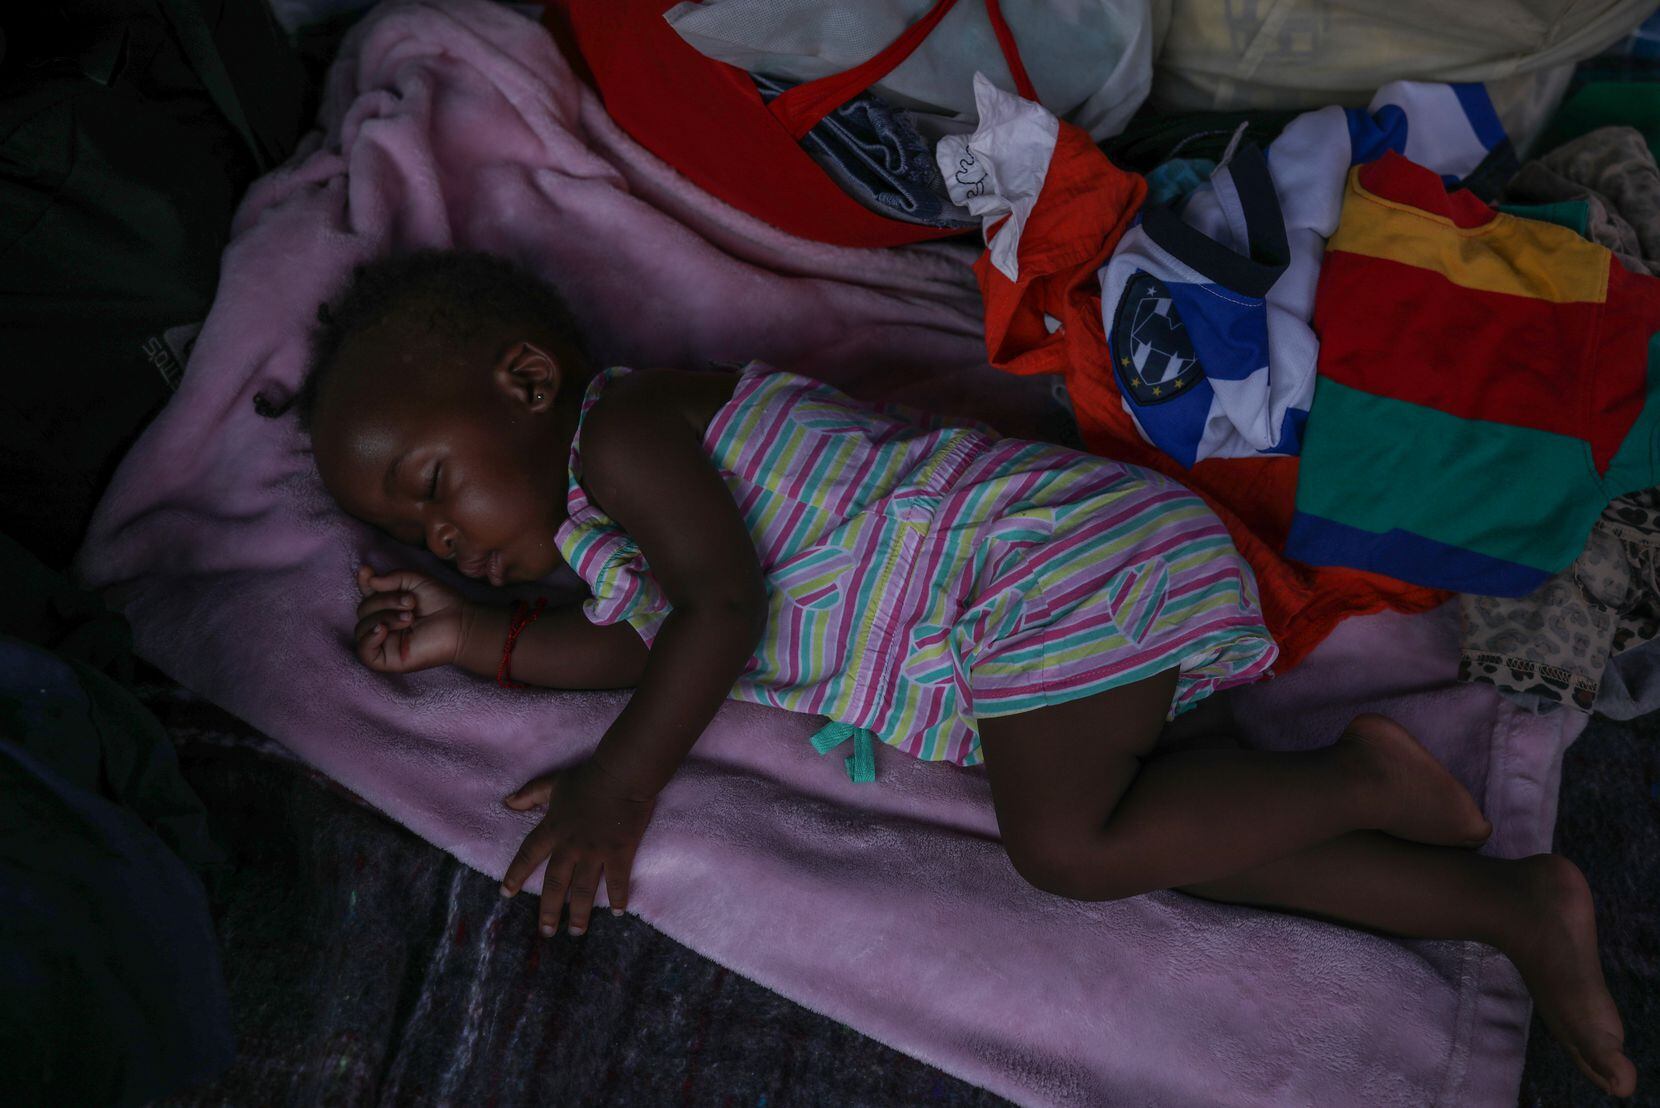 An 11-month-old baby sleeps outside Casa Indi, which serves as a dining room and shelter for...